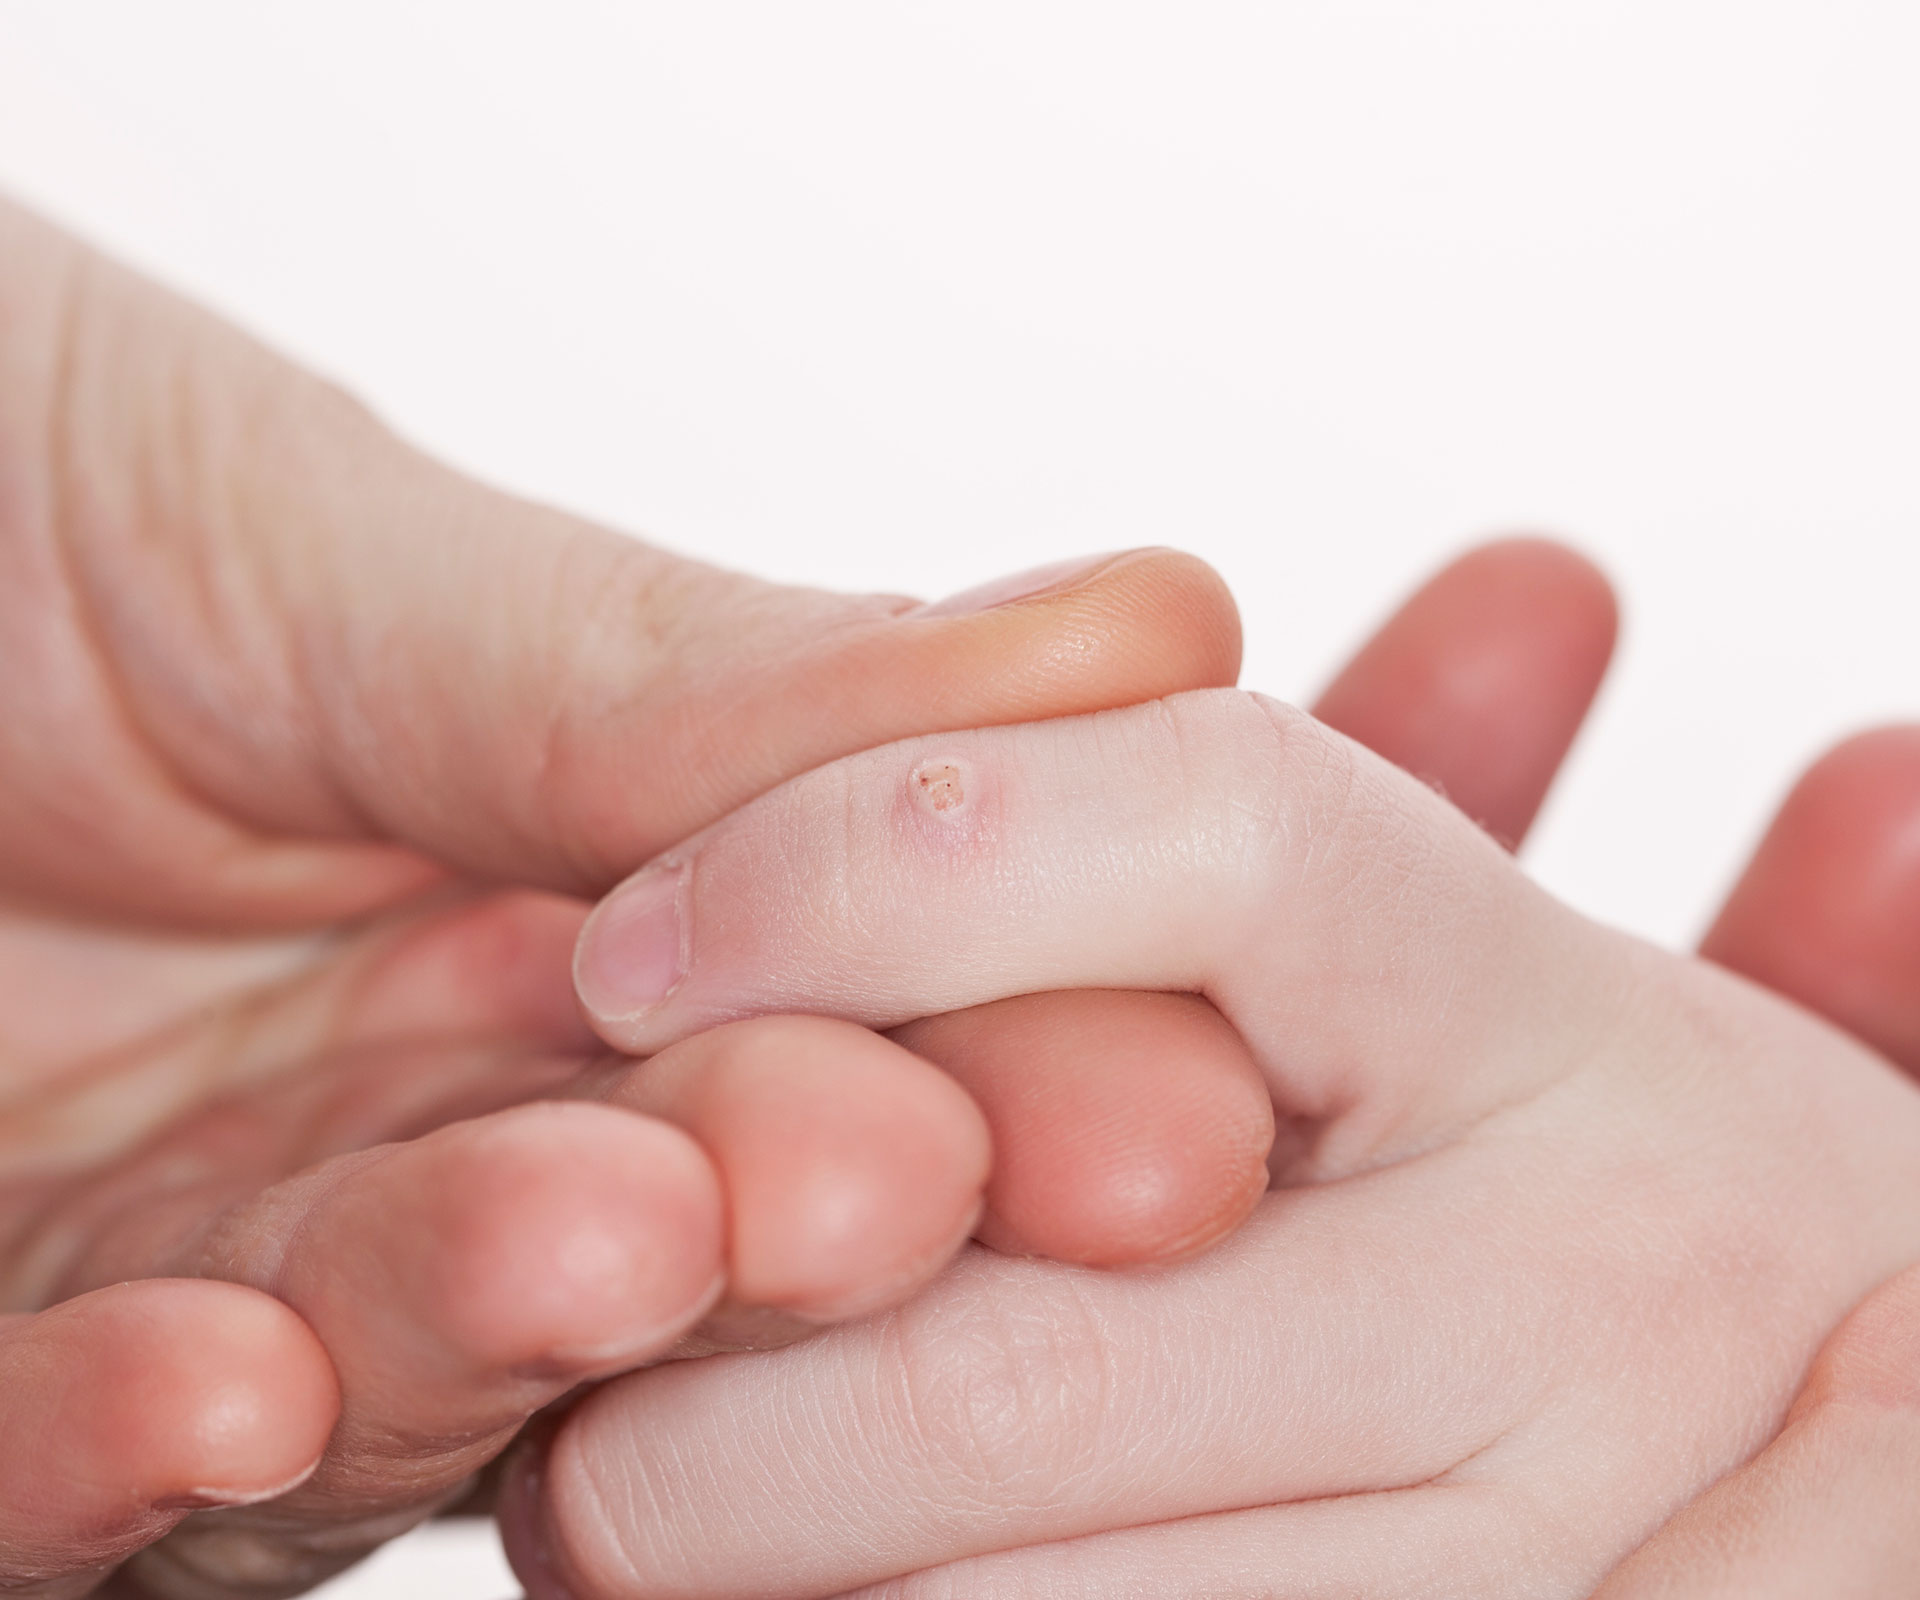 The truth about warts